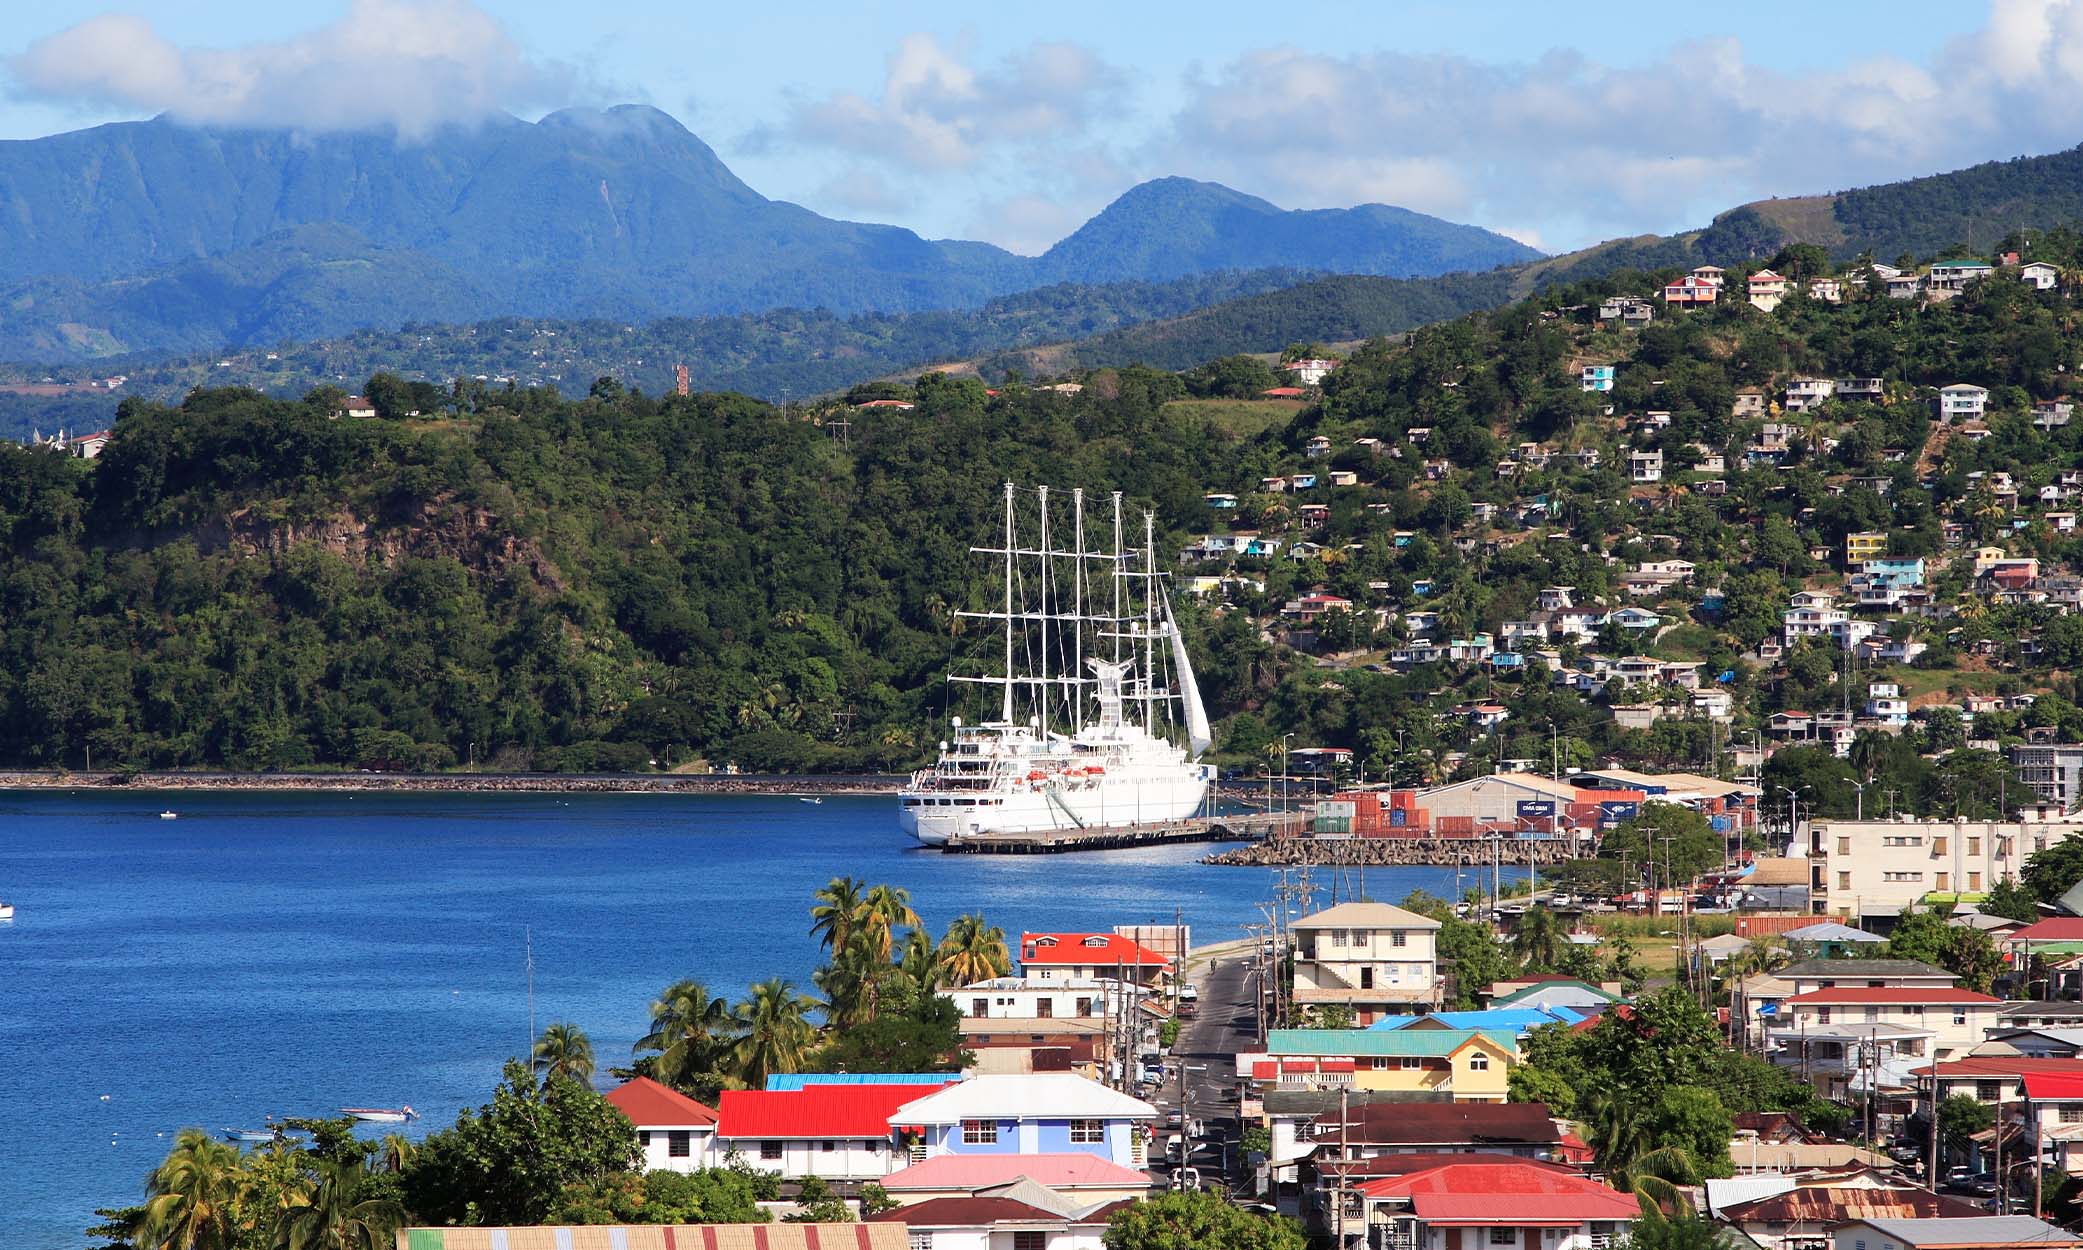 You'll find Dominica in the Eastern Caribbean region.